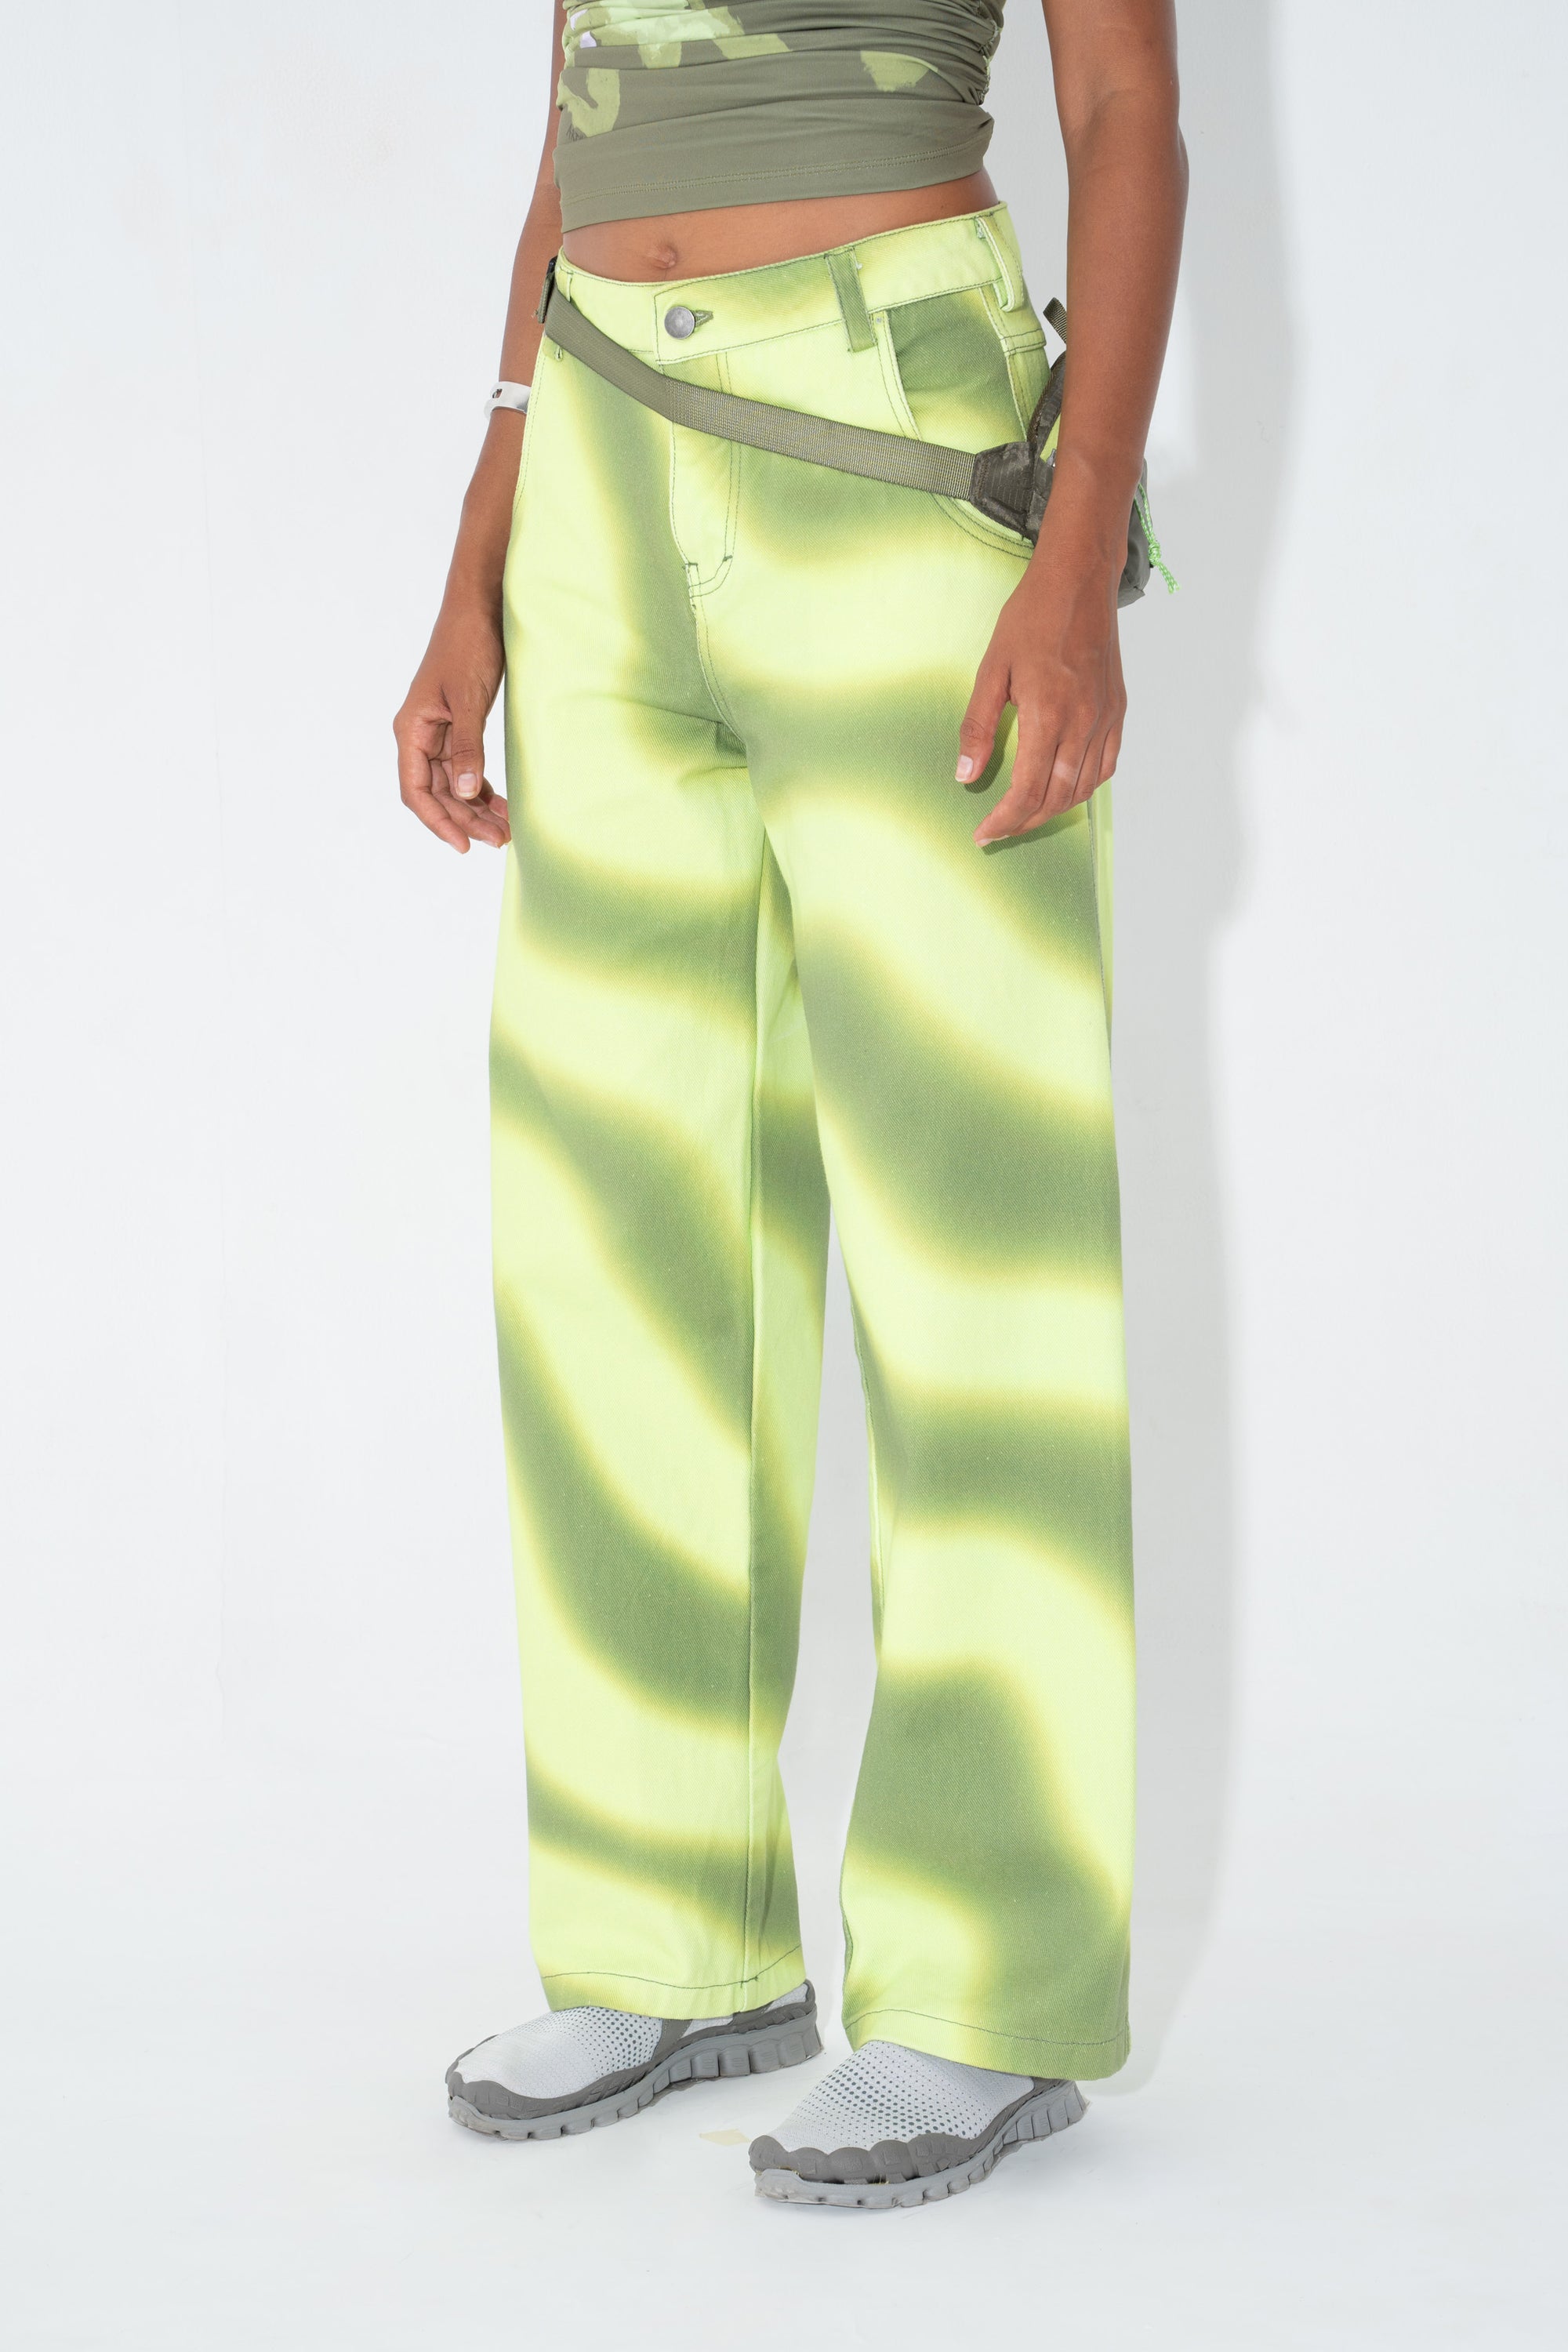 Arthur Apparel Green Graphic Mid Rise Relaxed Fit Jeans